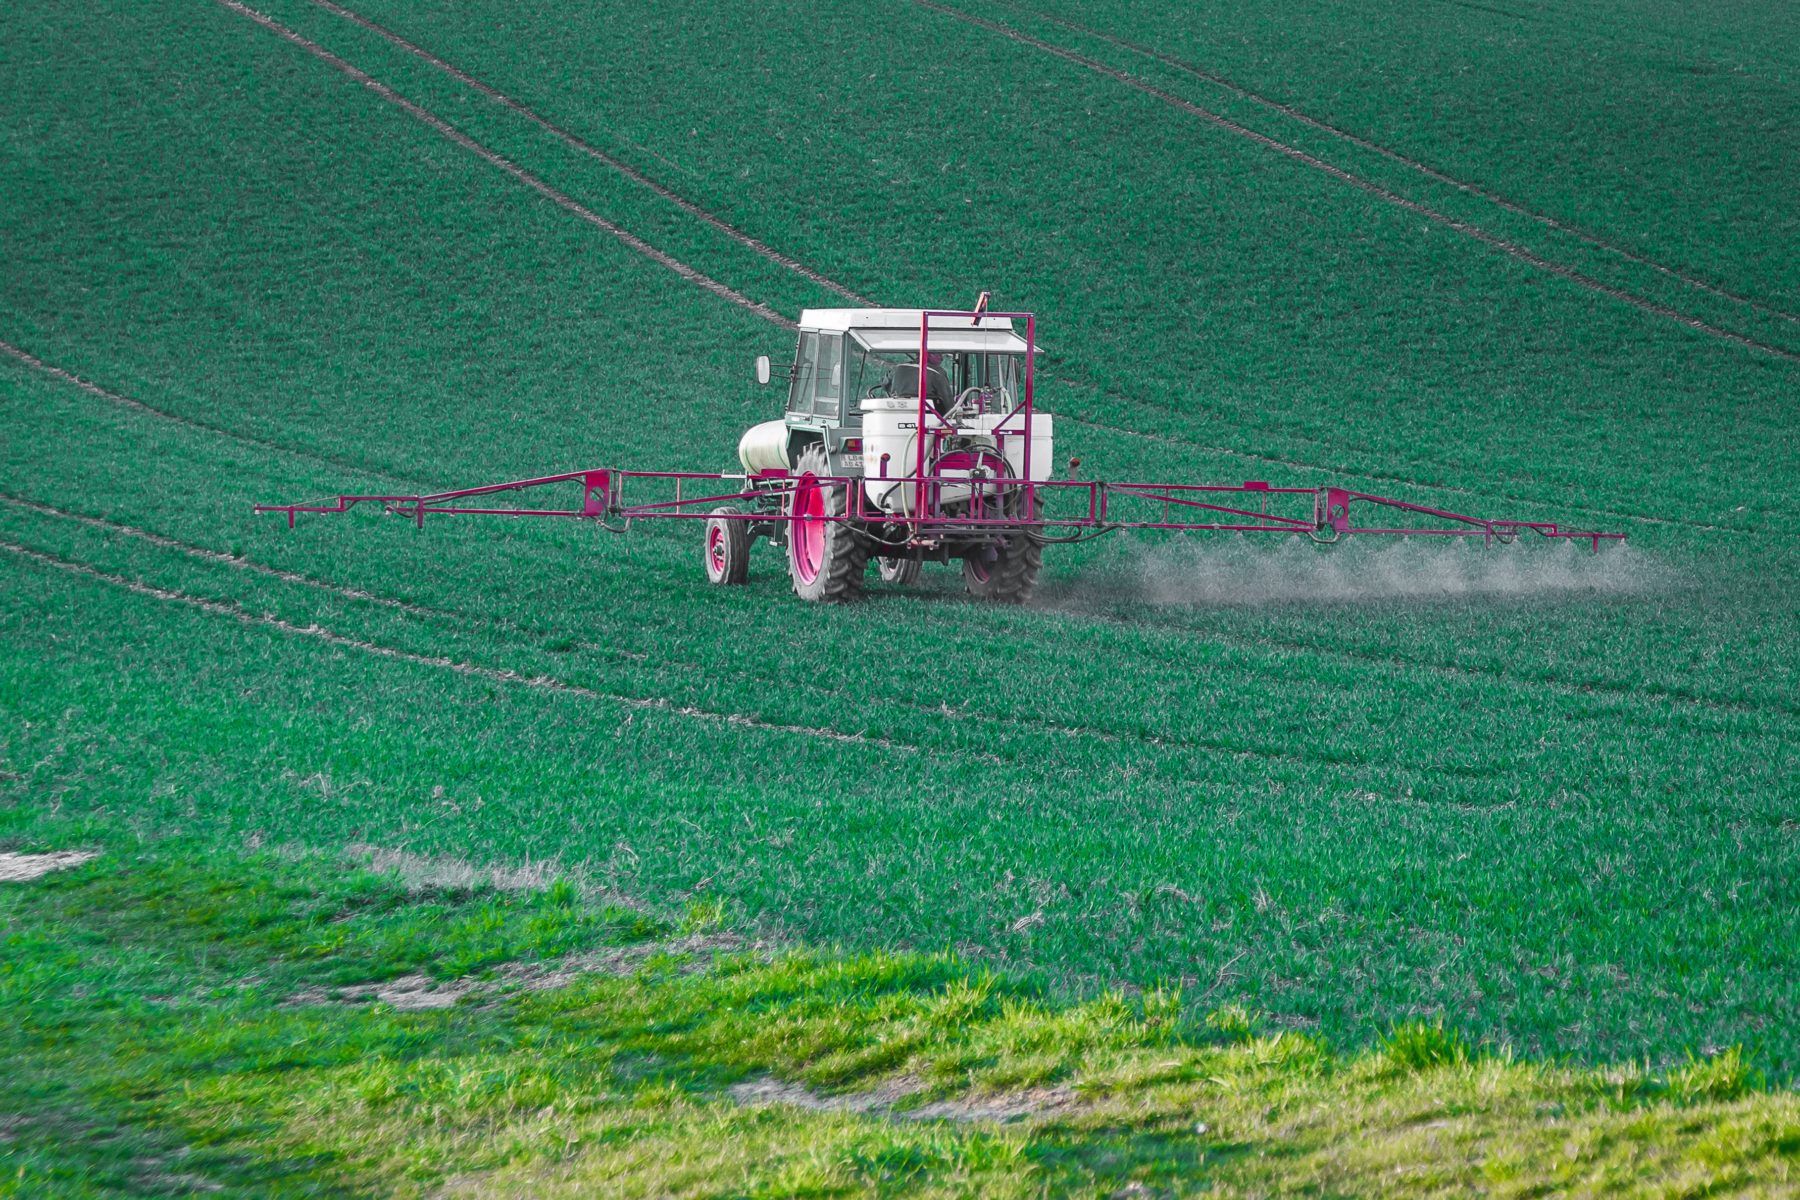 Synthetic Pesticide Bans to Boost Demand for Biopesticides and Organic Products